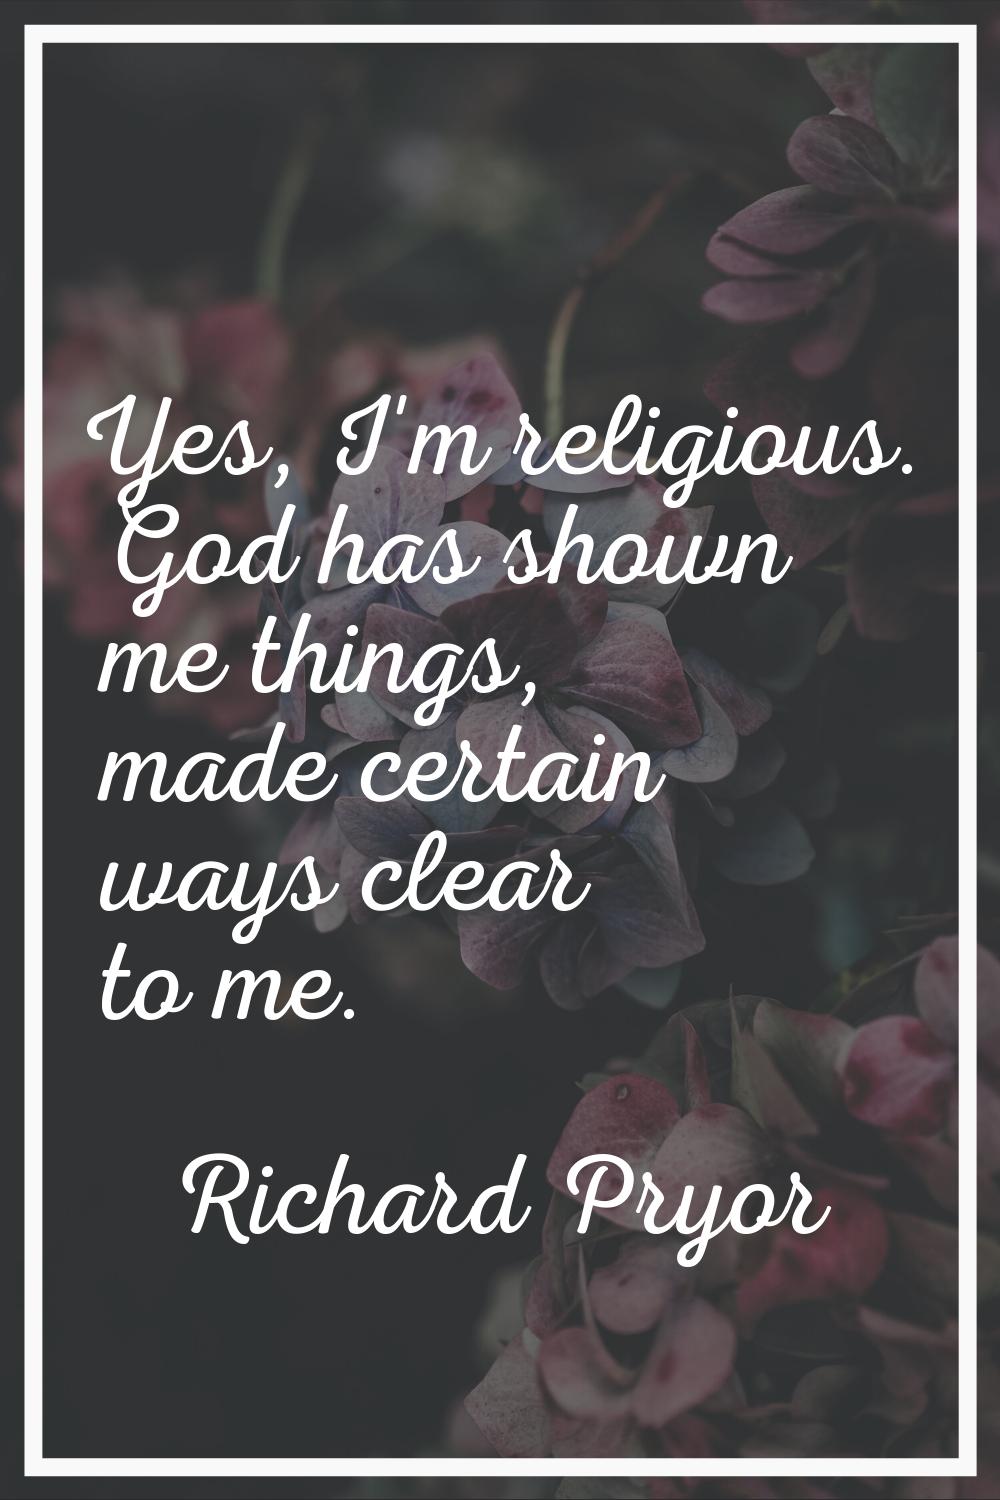 Yes, I'm religious. God has shown me things, made certain ways clear to me.